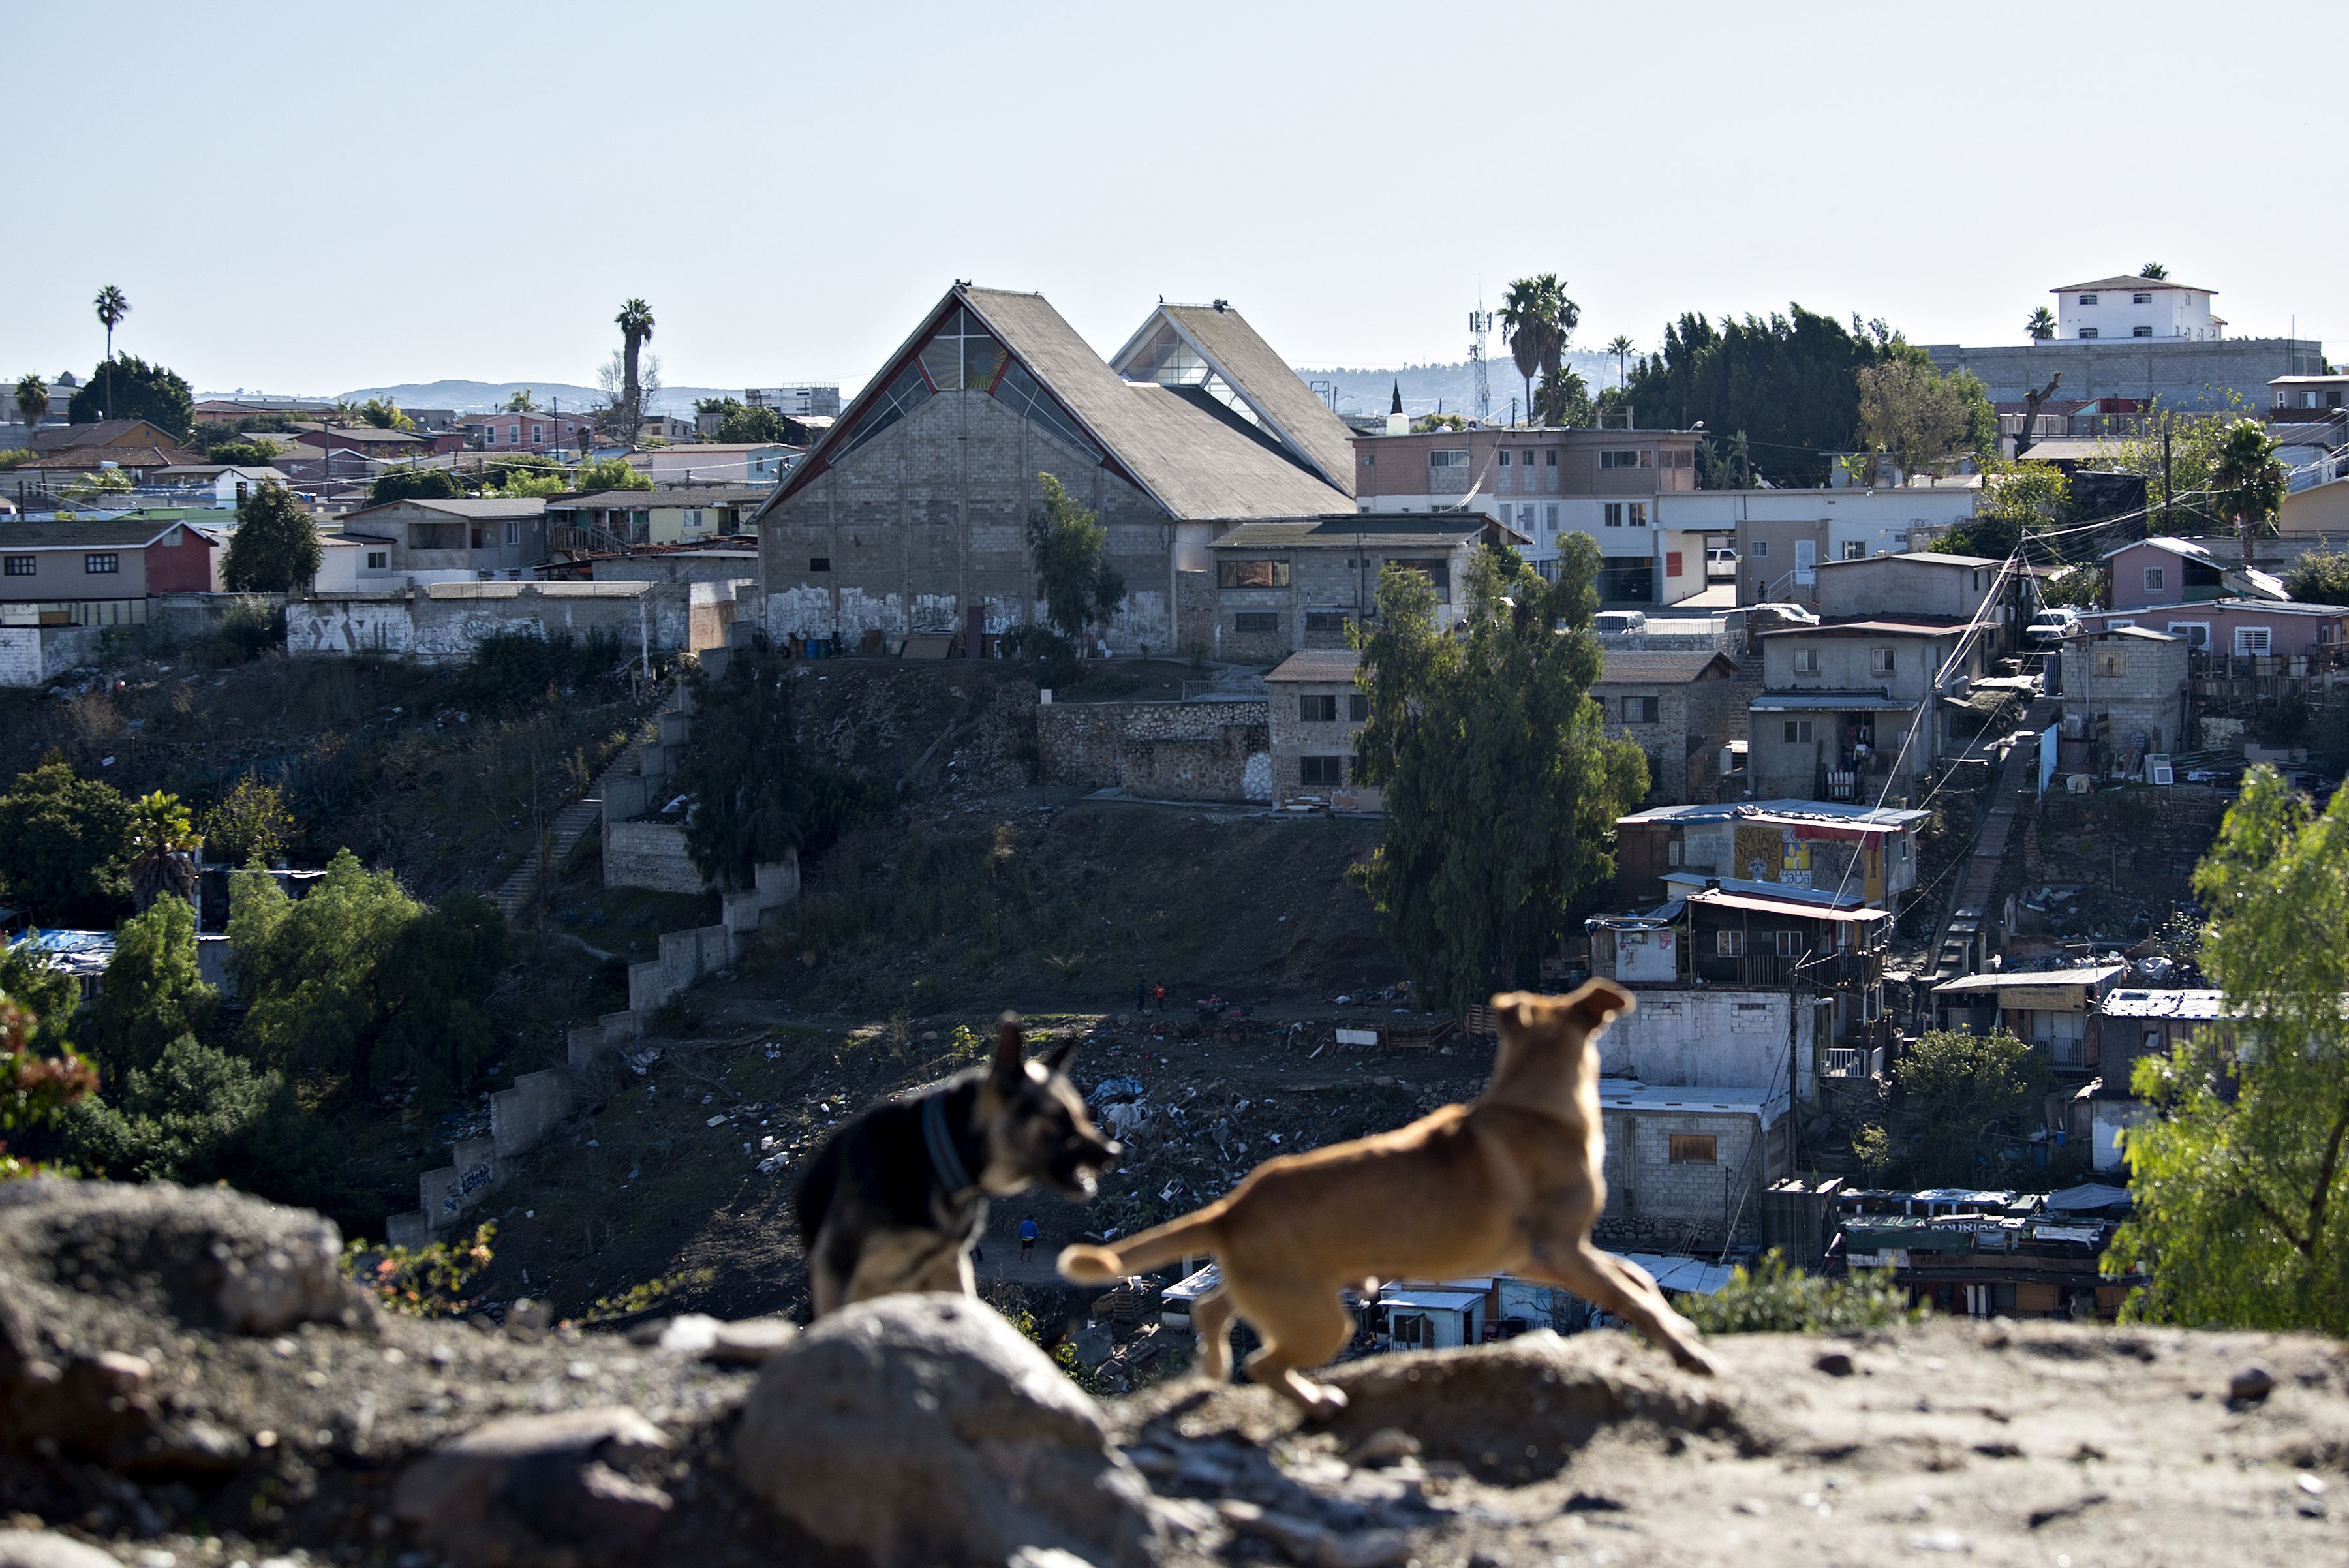 A pair of dogs fight in the Libertad Parte Alta neighborhood near the Tijuana airport Dec. 1. Image by Amanda Cowan. Mexico, 2019.